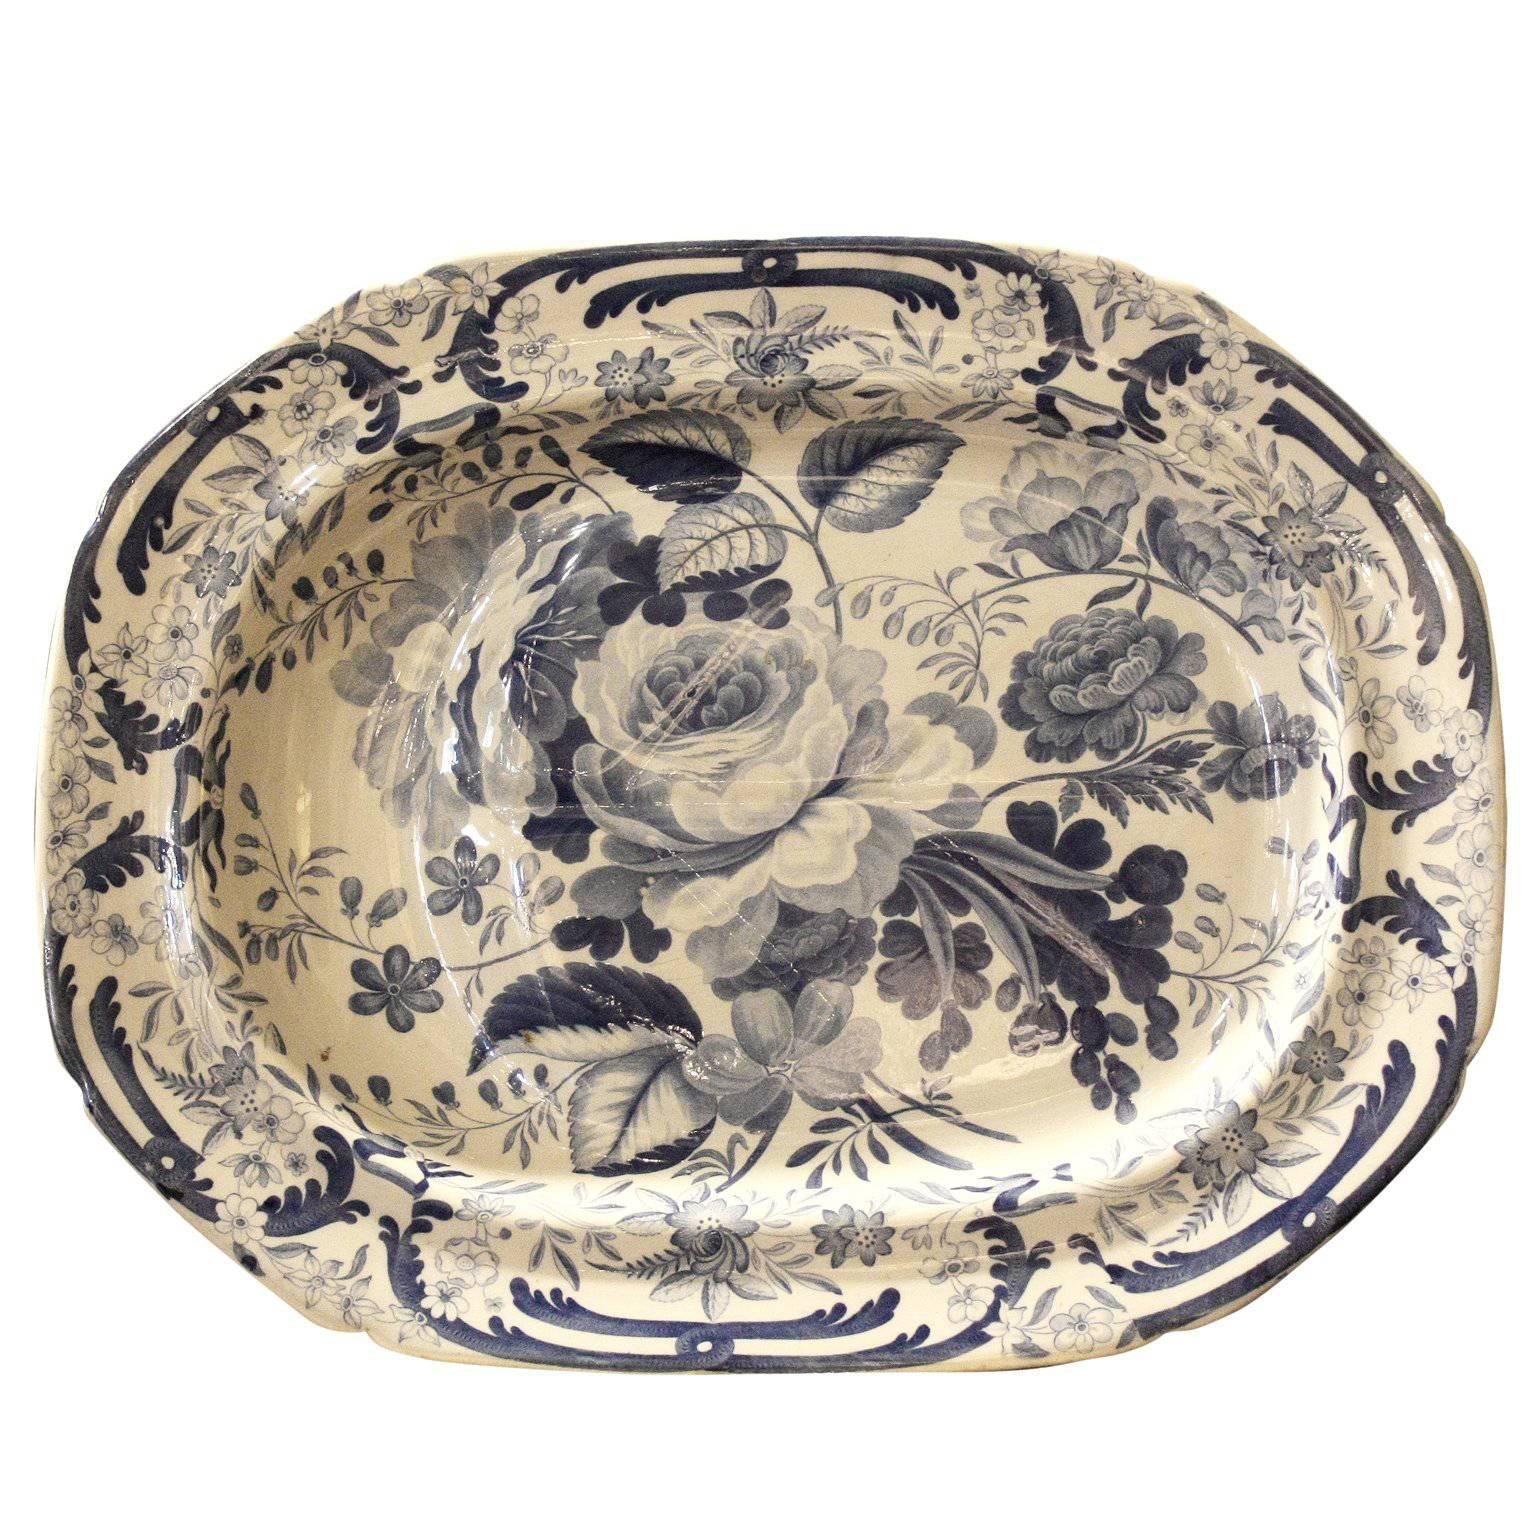 Large Floral Pattern Platter with Well